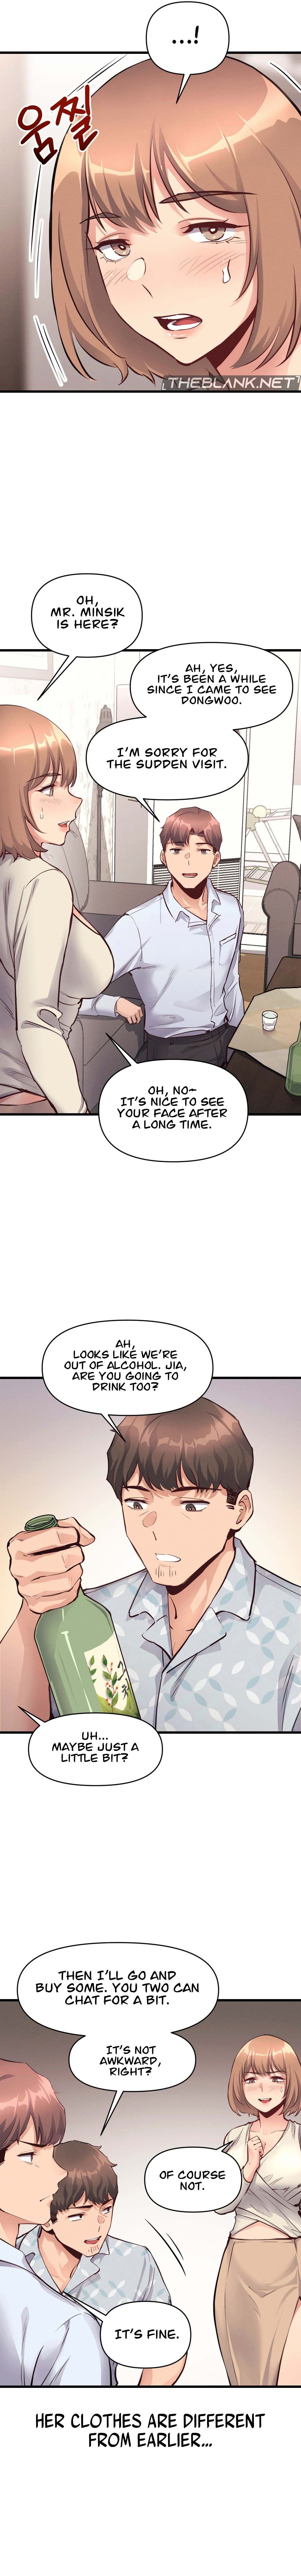 My Life is a Piece of Cake - Chapter 25 Page 4